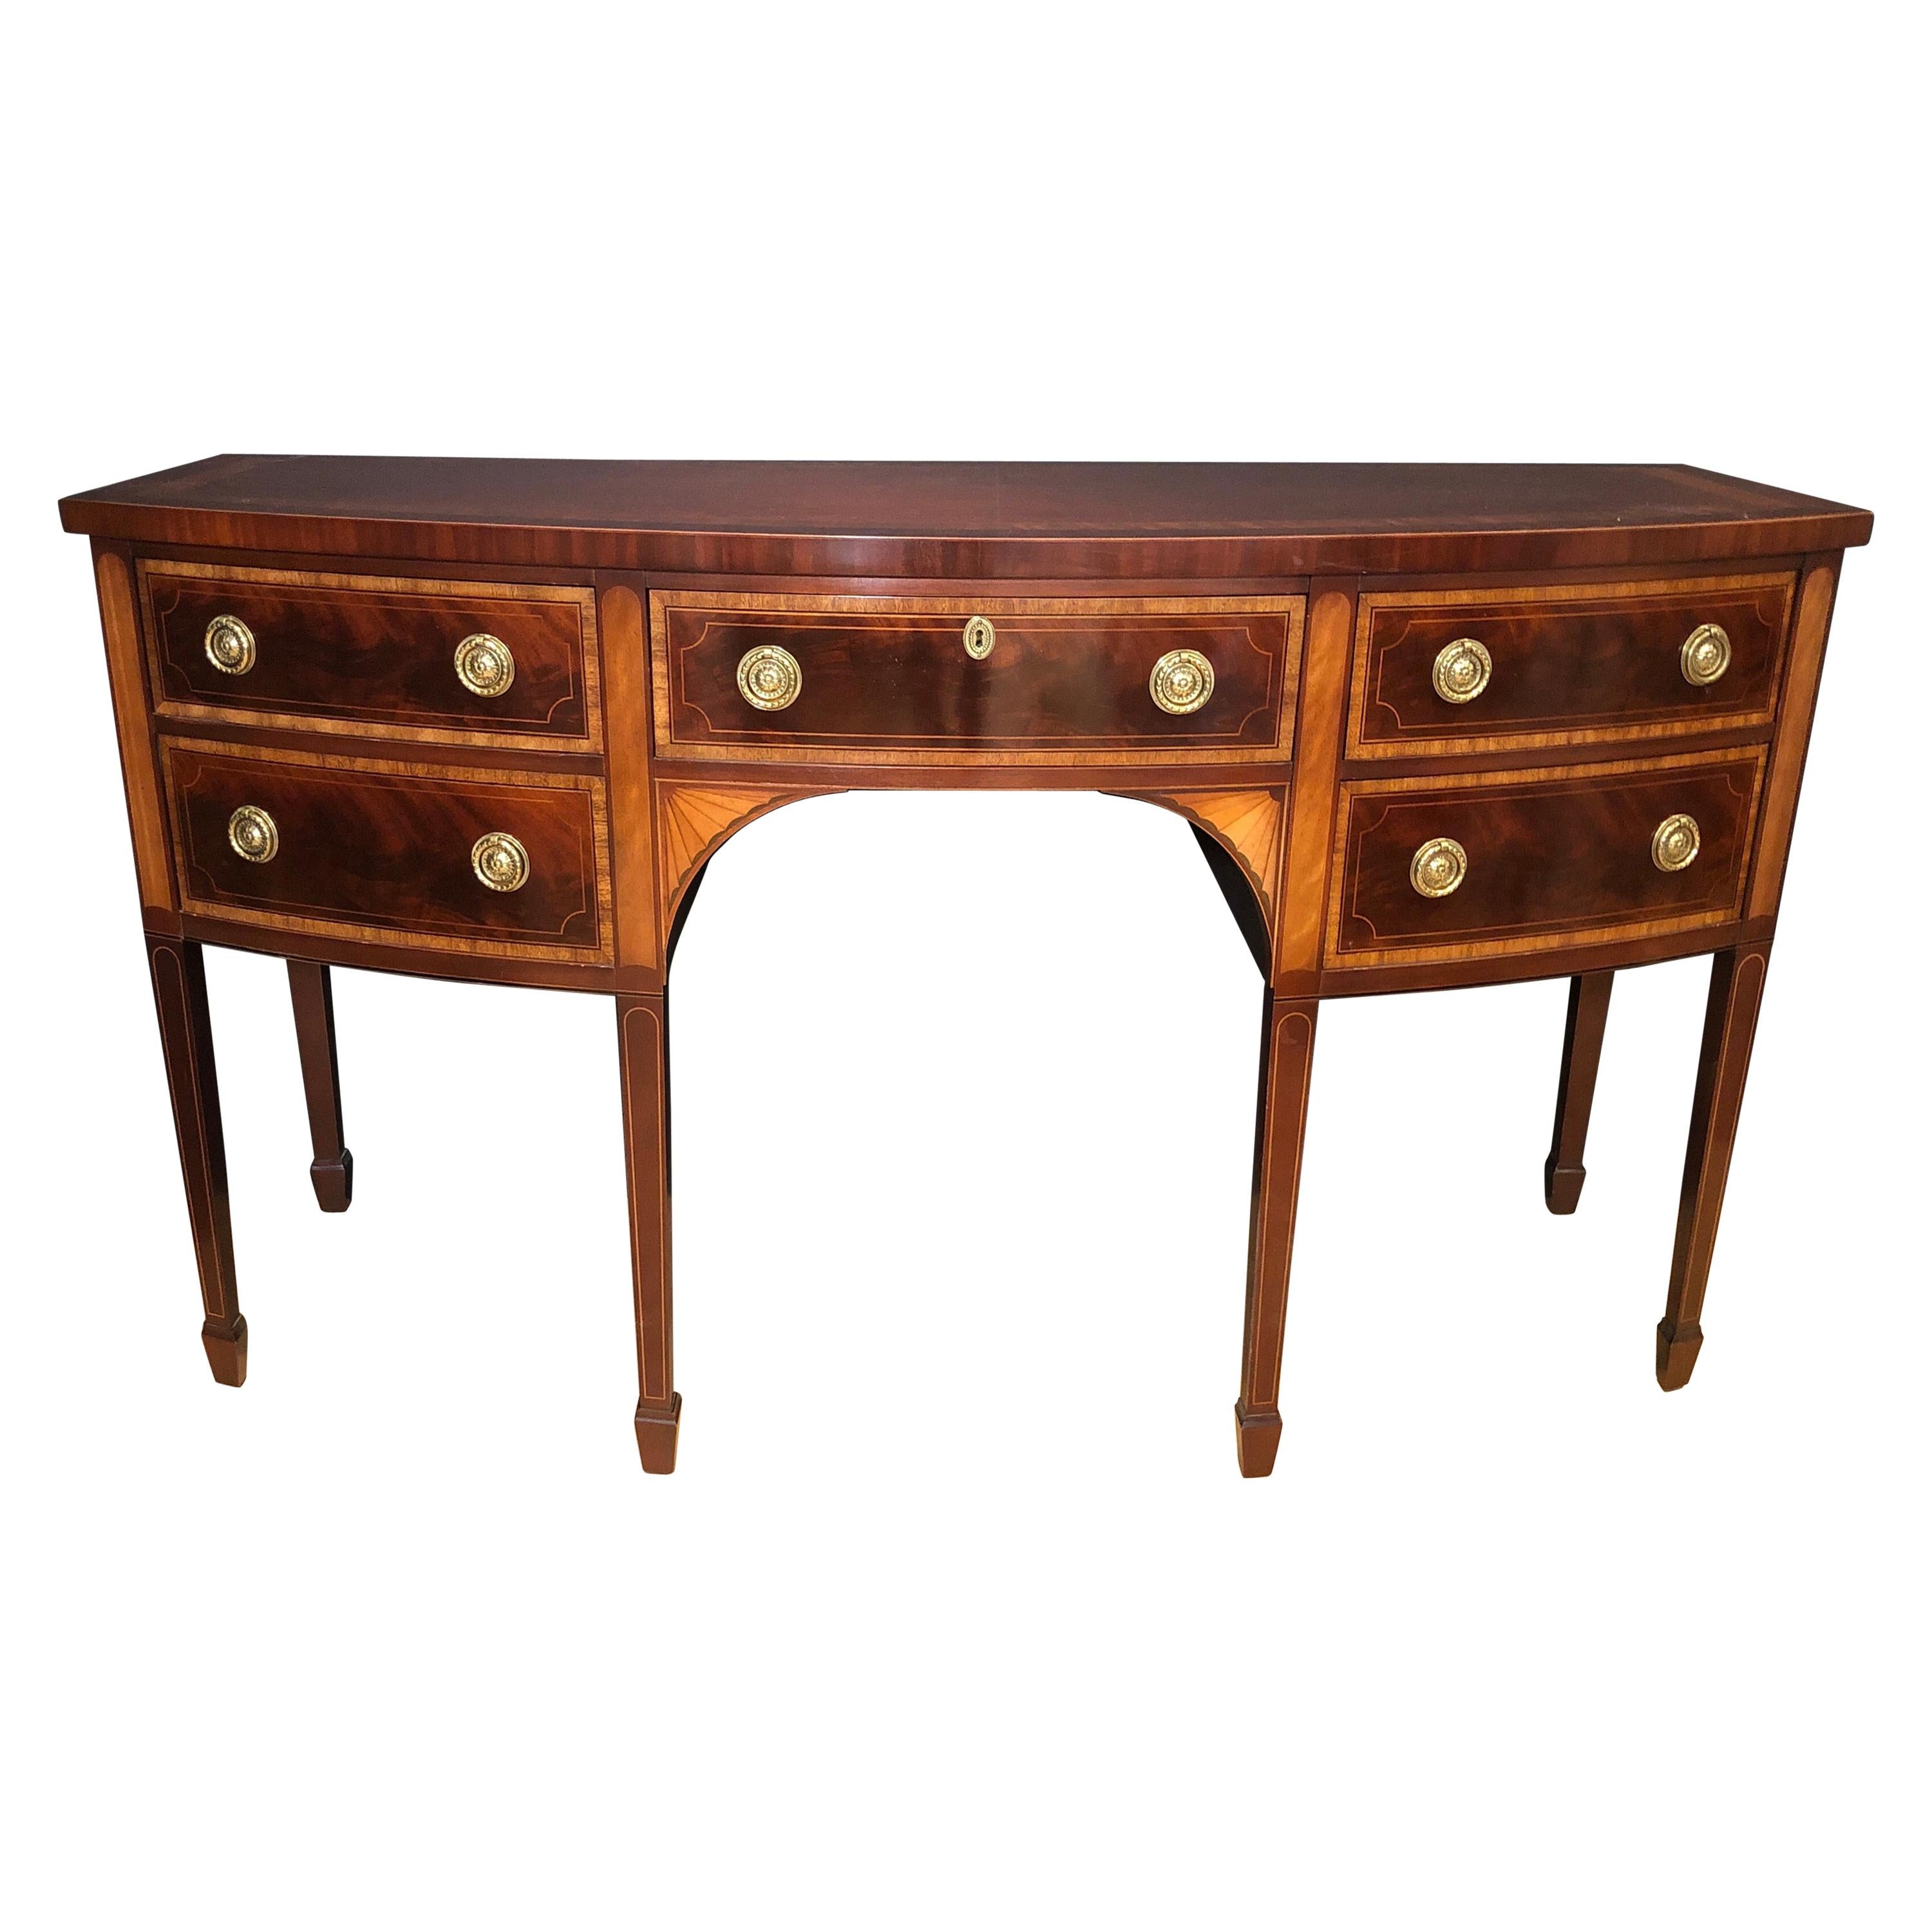 Mahogany and Satinwood Inlaid Bow Front Sideboard by Baker Historic Collection